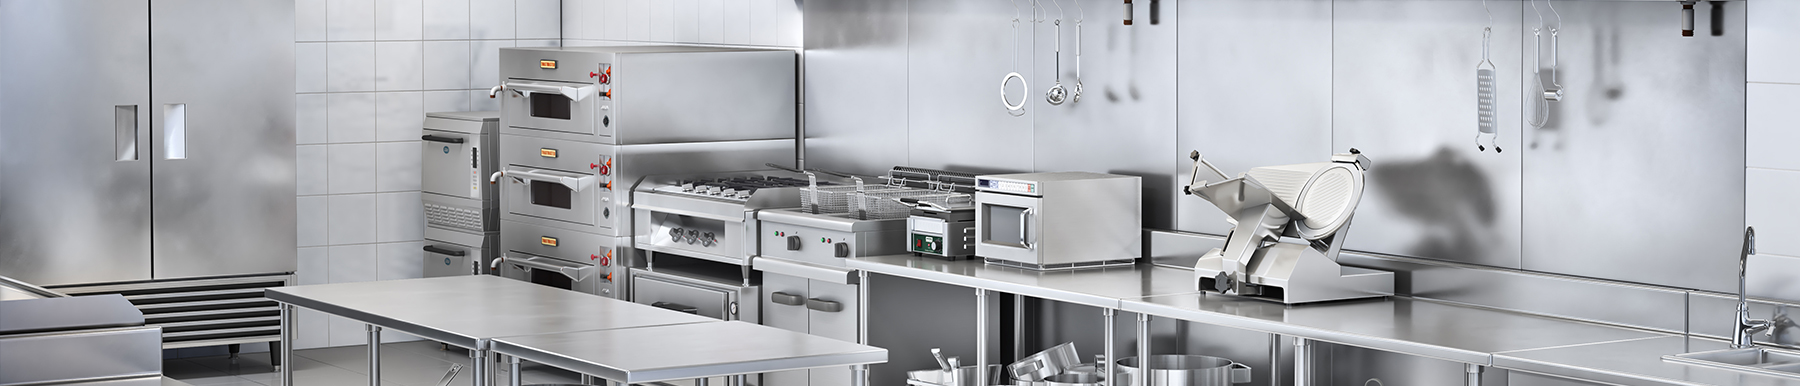 Catering Equipment Suppliers Near North Lanarkshire | H2 Catering Equipment Catering Equipment